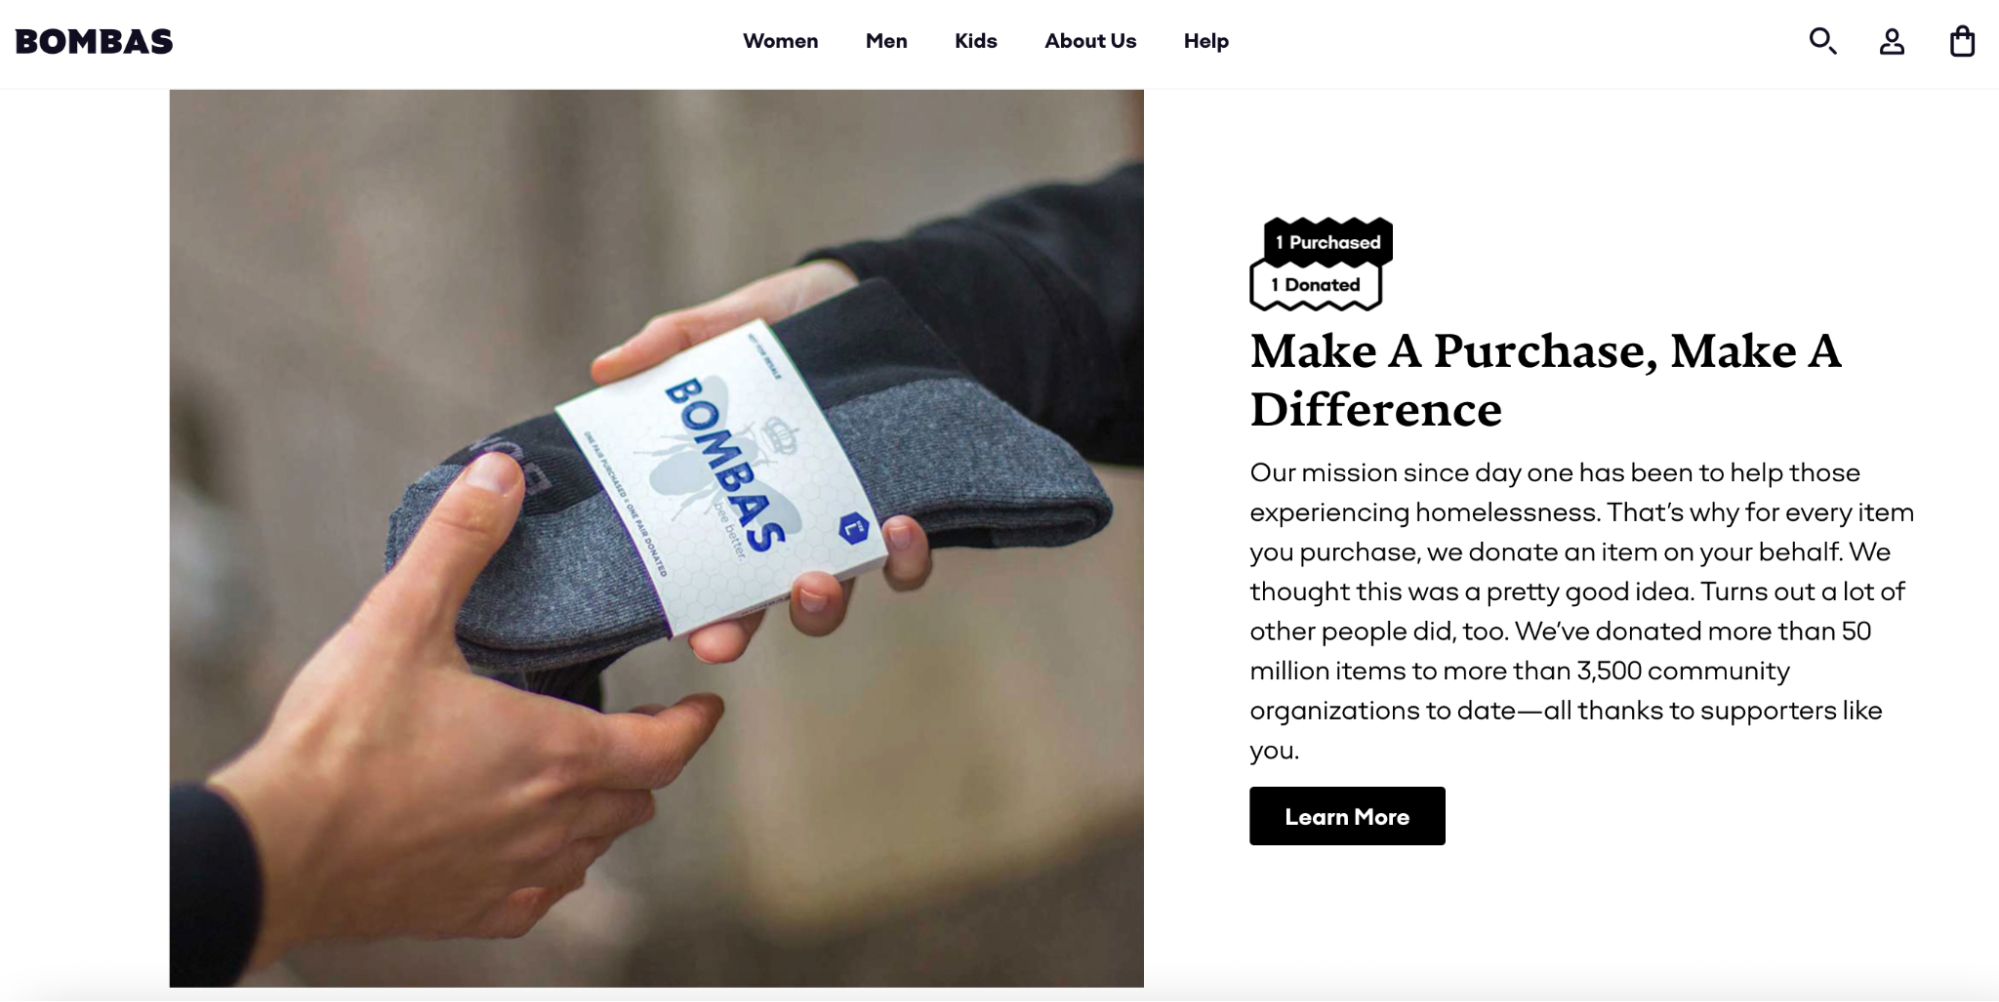 Direct-to-consumer brand Bombas’ website page describing its donation one program